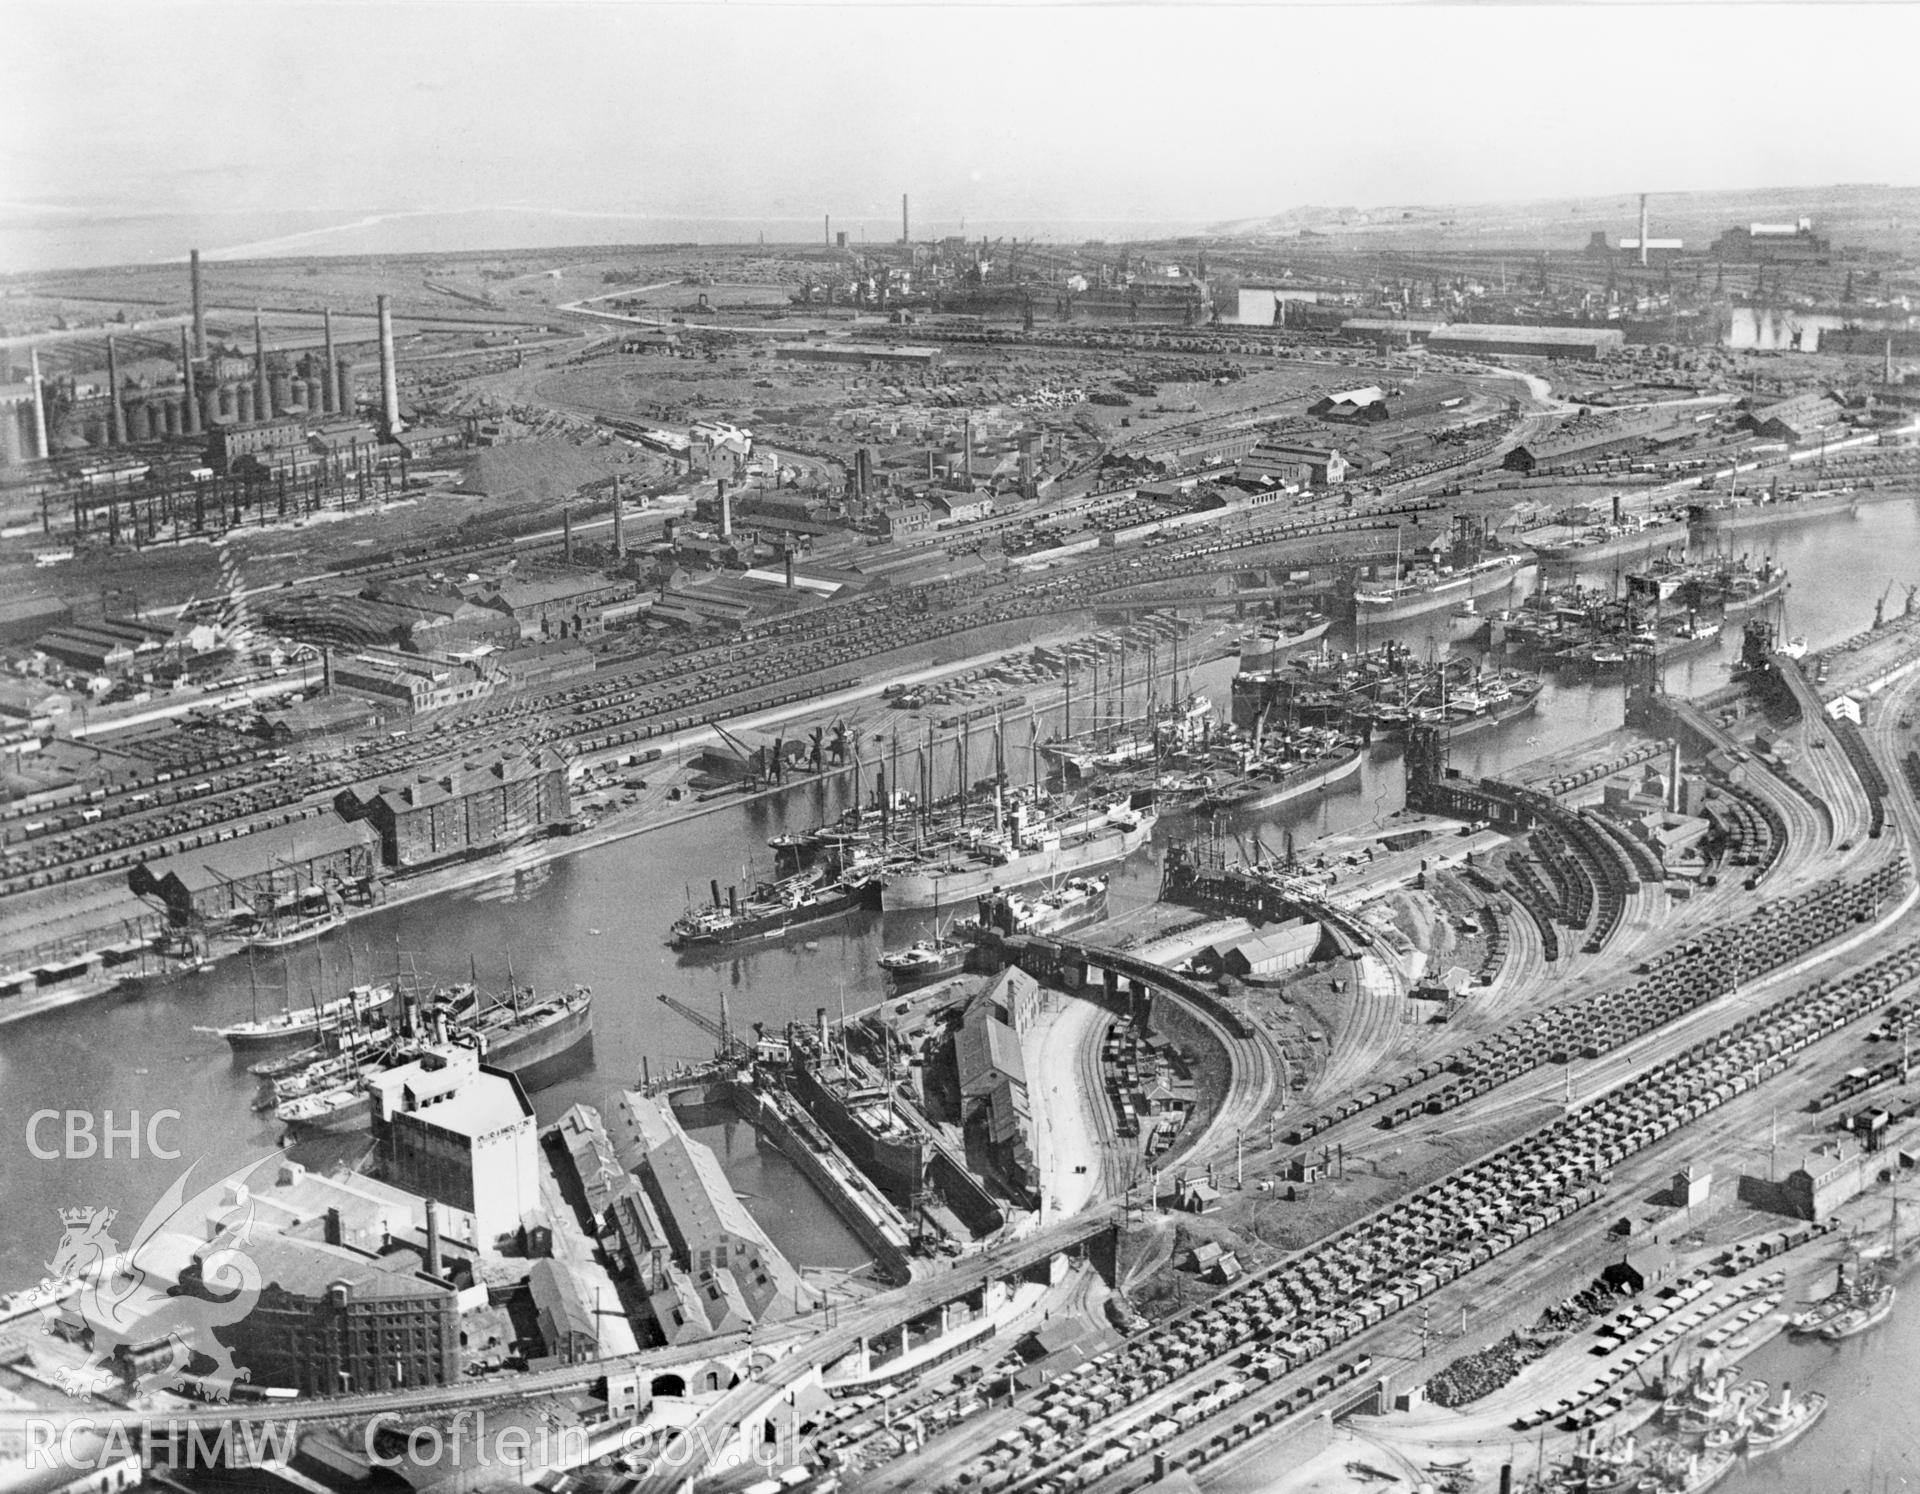 Black and white oblique aerial photograph showing Cardiff Docks, from Aerofilms album no W22 (Glamorgan Cardiff), taken by Aerofilms Ltd and dated 1921.